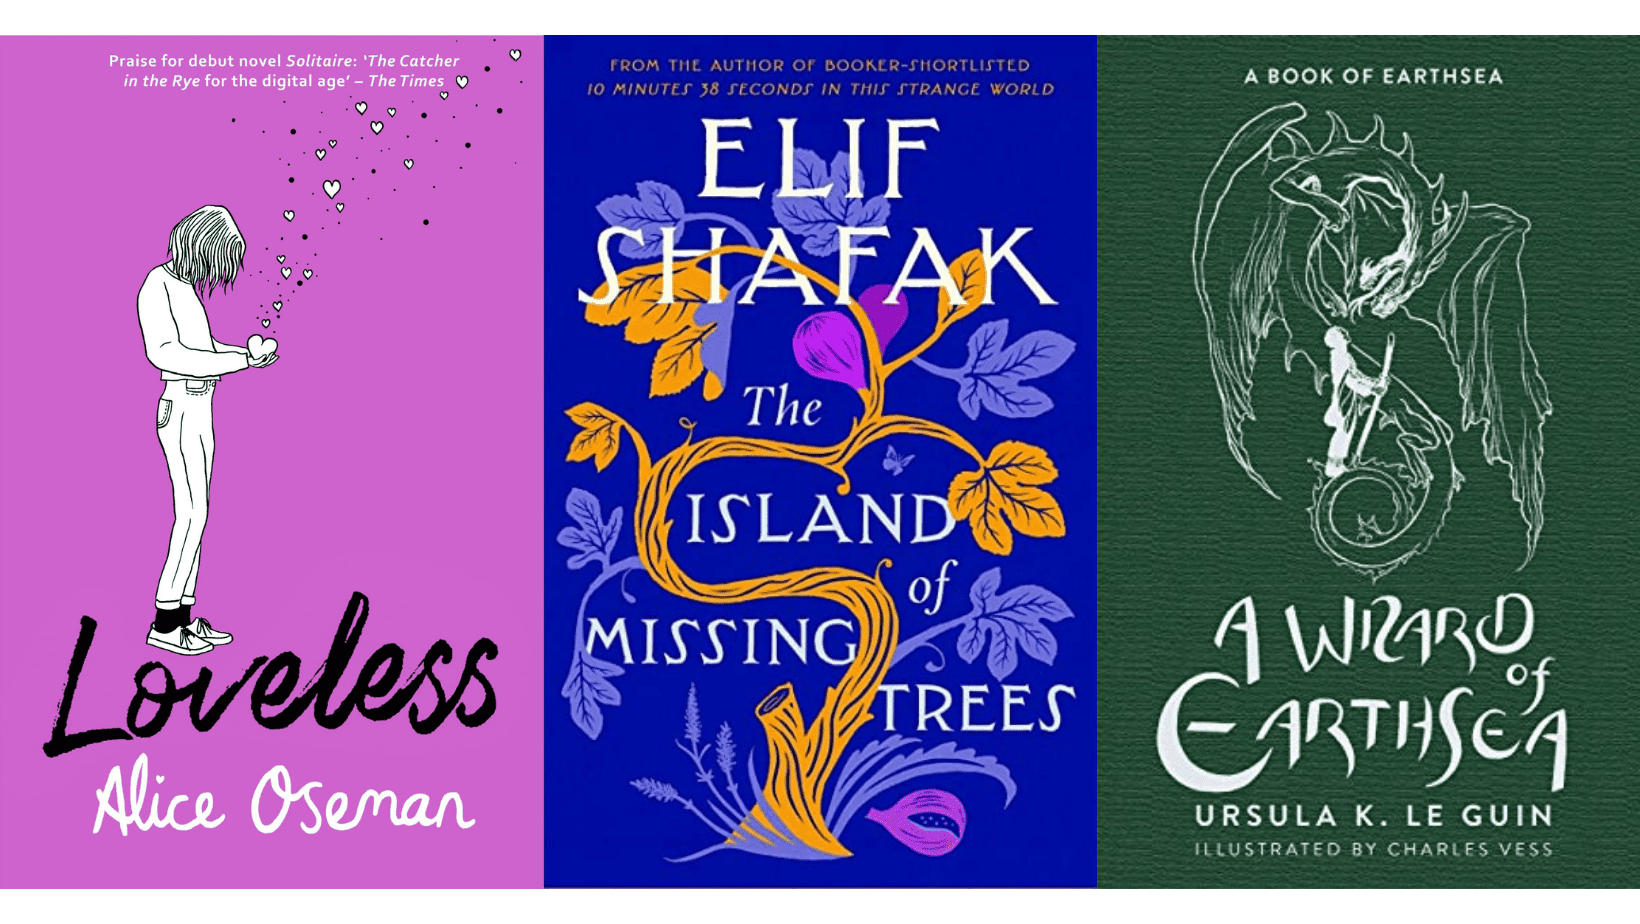 Three book covers in a graphic. From left to right they are "Loveless" by Alice Oseman, "The Island of Missing Trees" by Elif Shafak and "A Wizard of Earthsea" by Ursula K. Le Guin